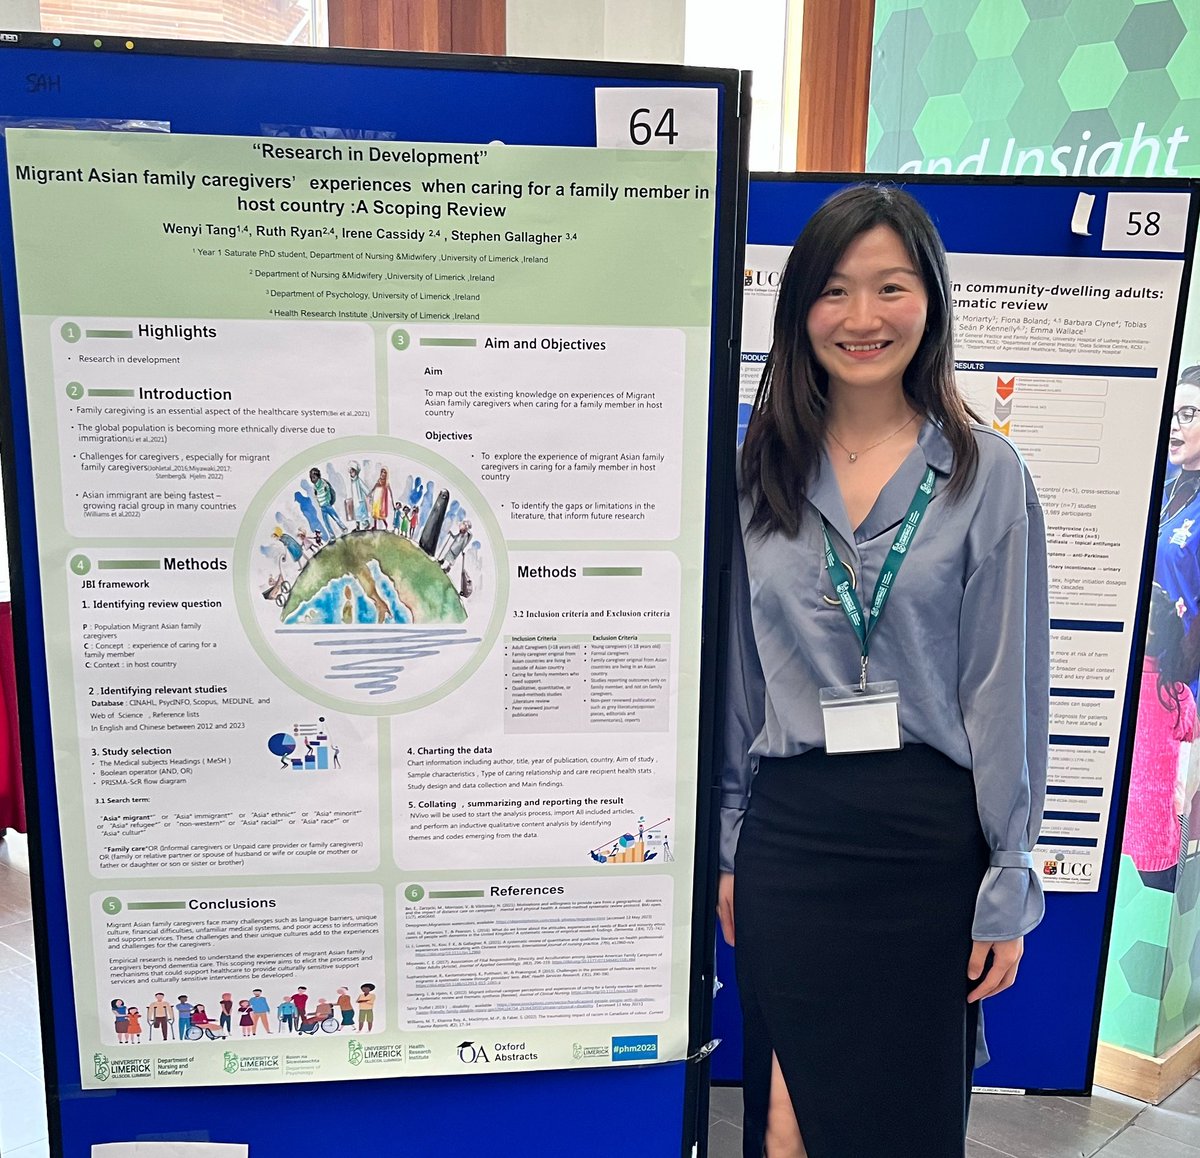 Psychology, Health & Medicine (PHM) Conference 2023 ✅

It was a great experience attending and presenting poster at the @phm2023 conference .

It was wonderful day and met many lovely people 💕